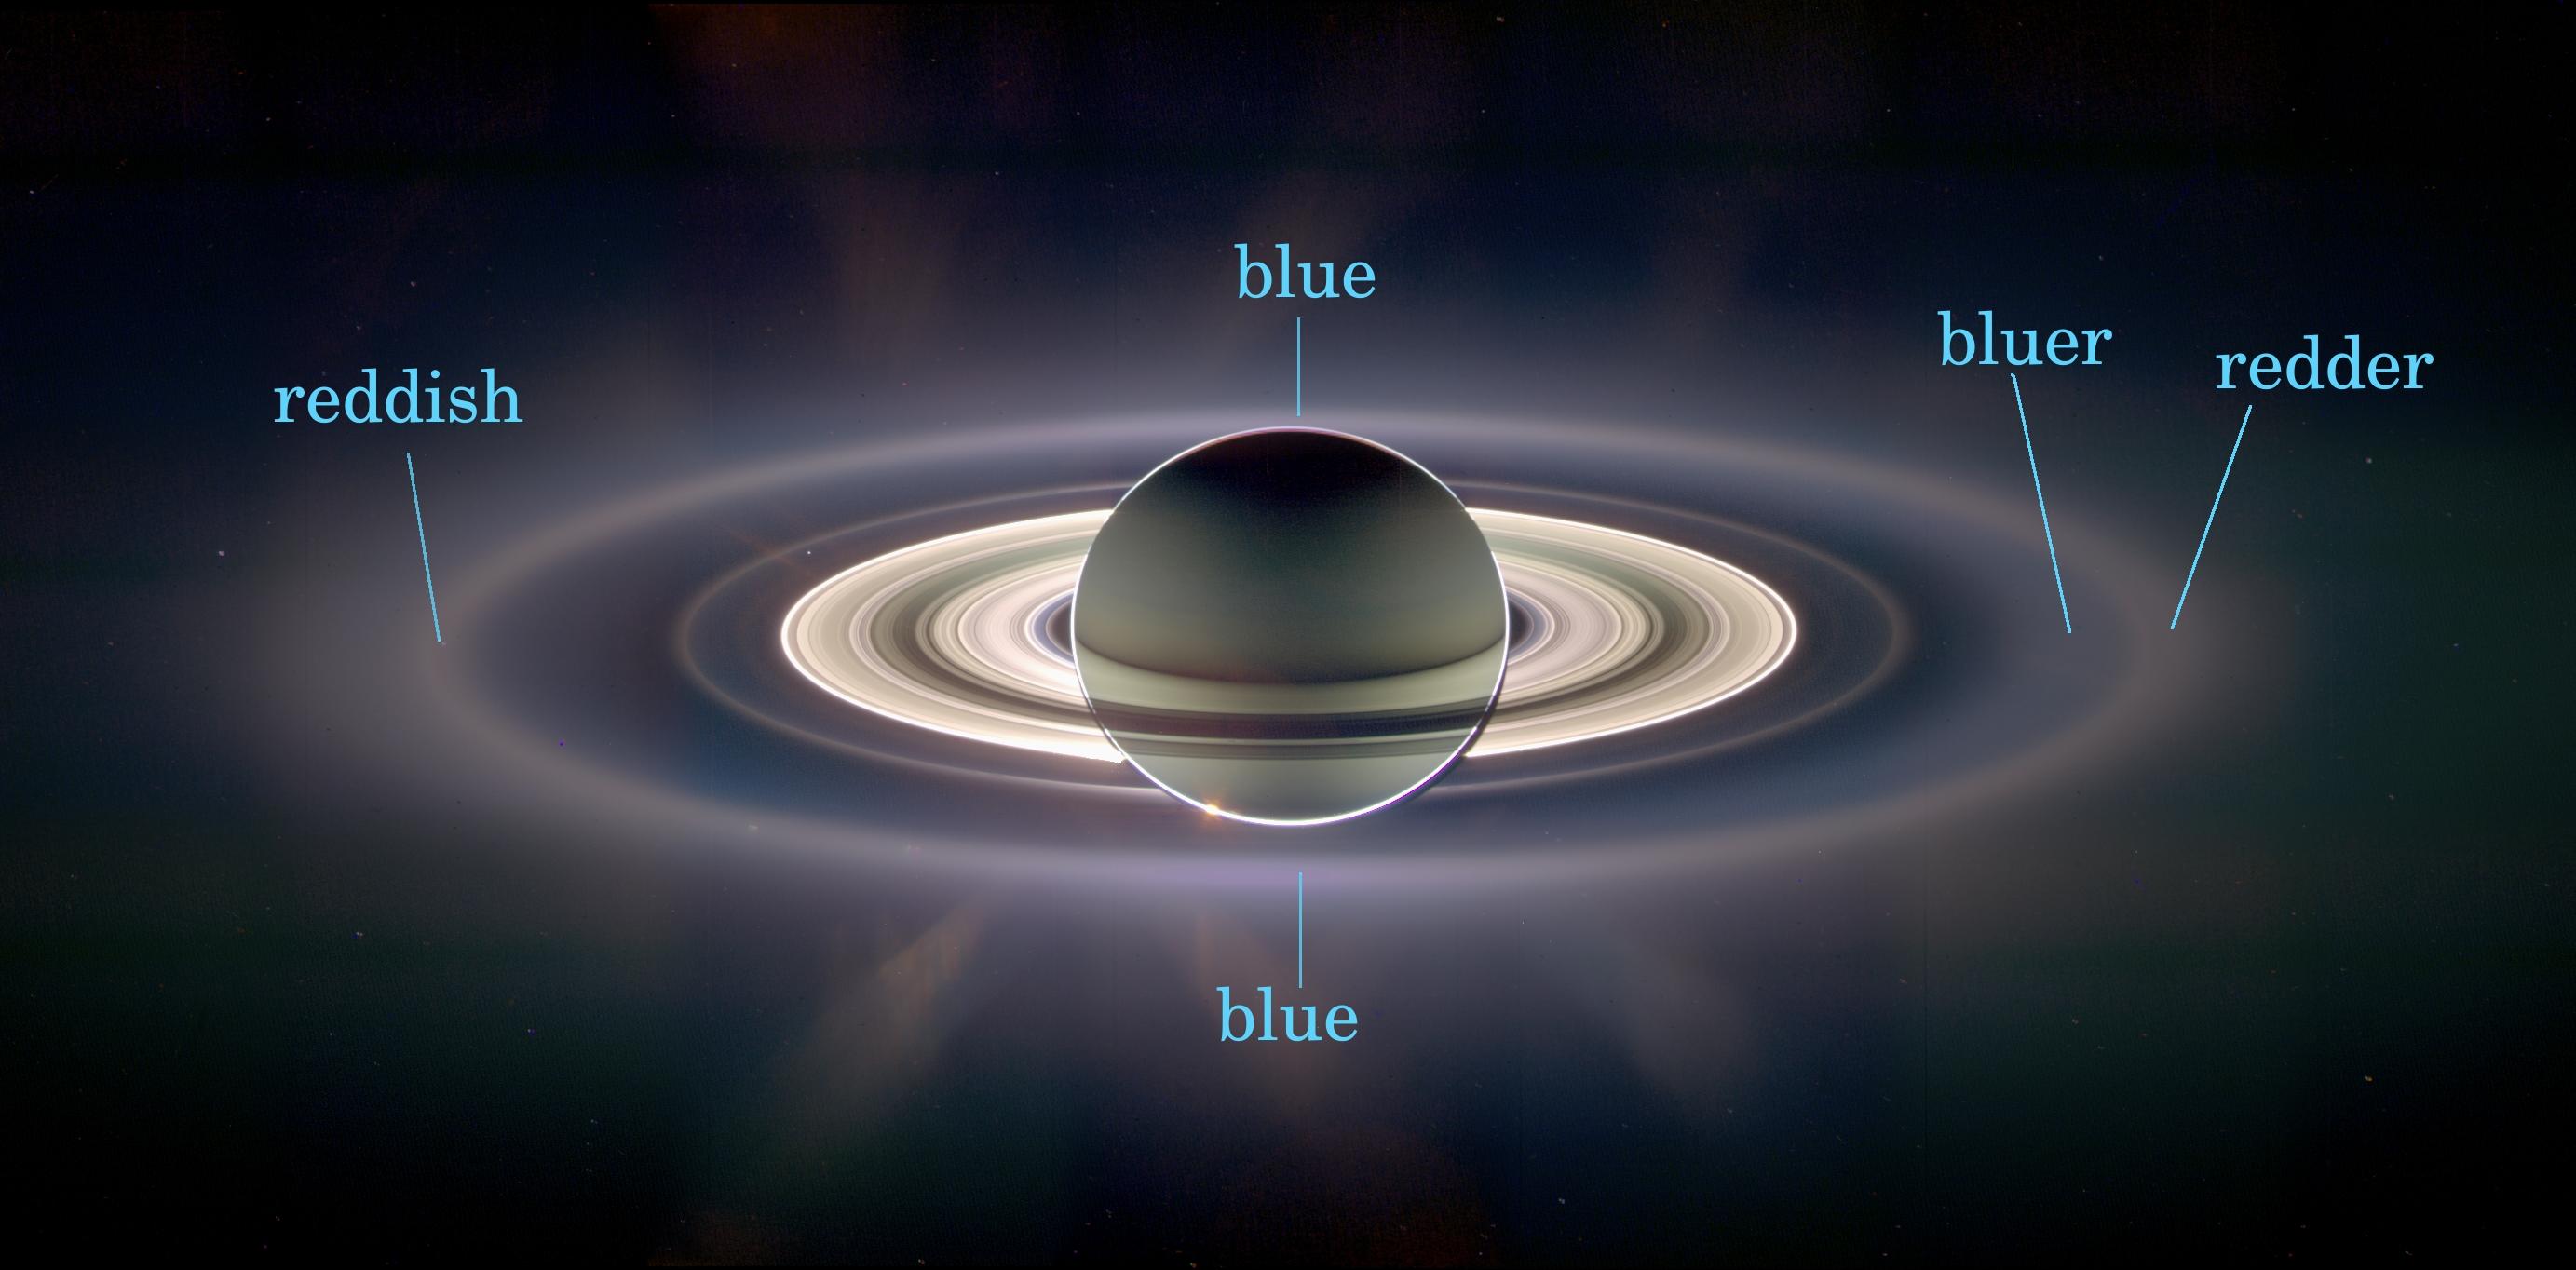 Panorama of Saturn and its ring with labels